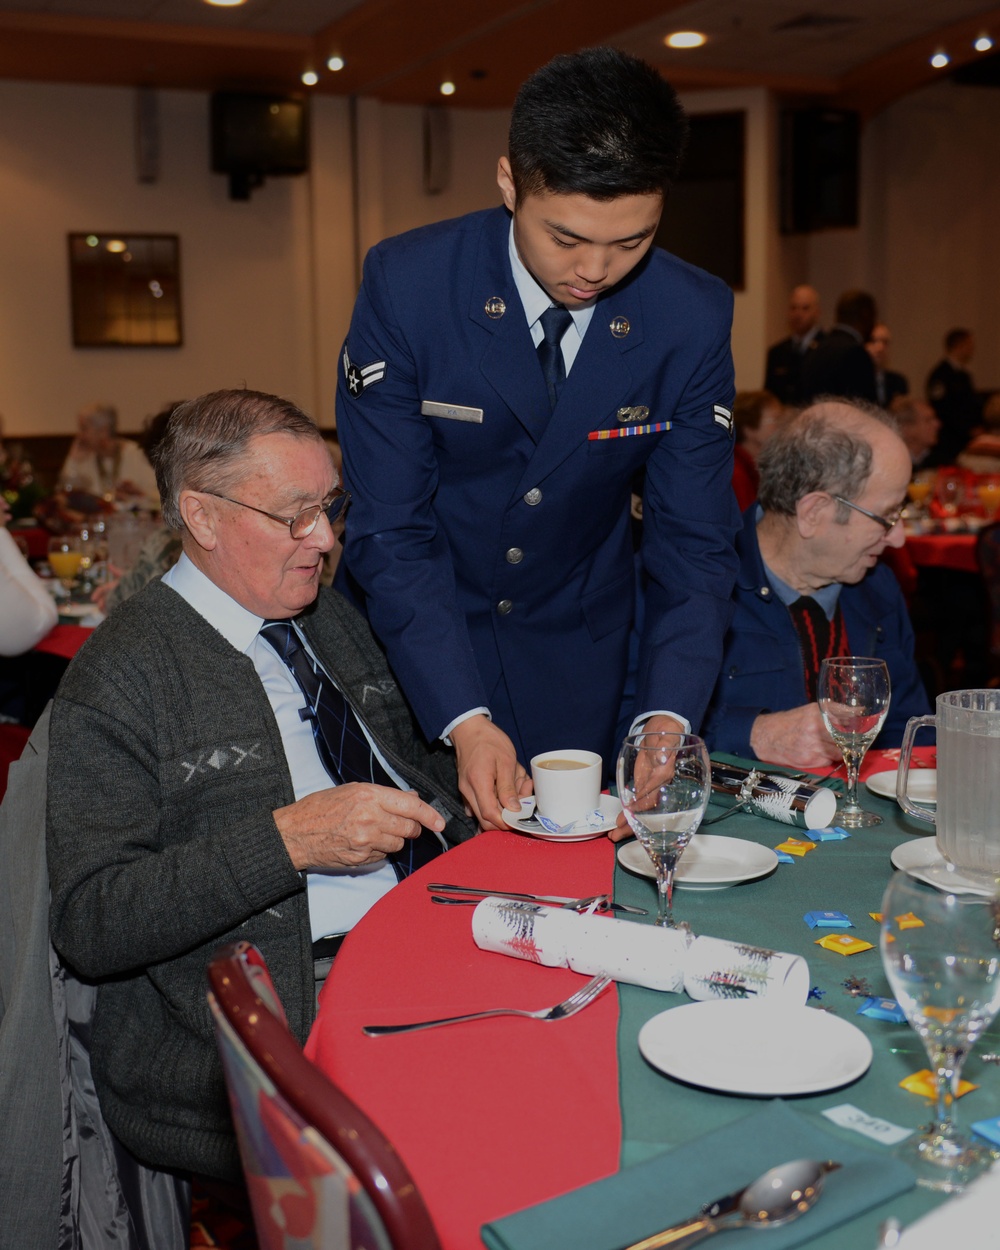 Team Mildenhall top 3 hosts 32nd annual senior citizens' Christmas party